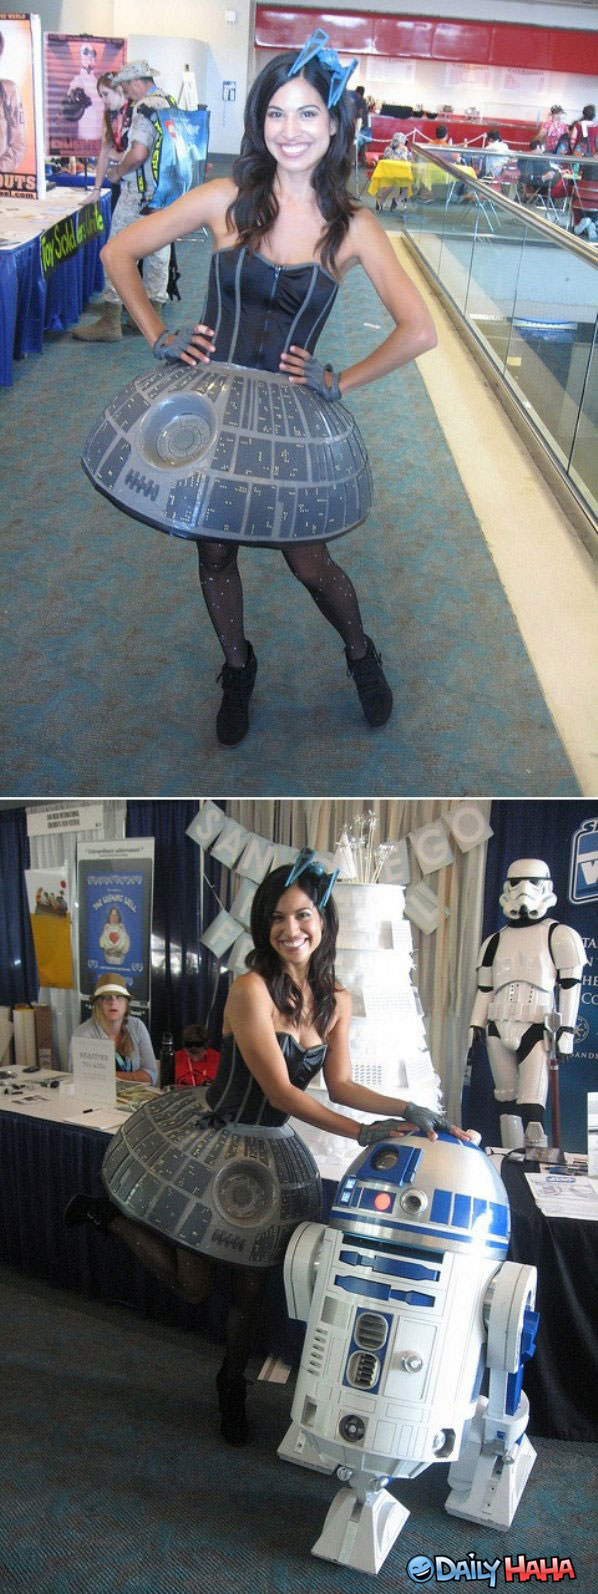 Death Star funny picture